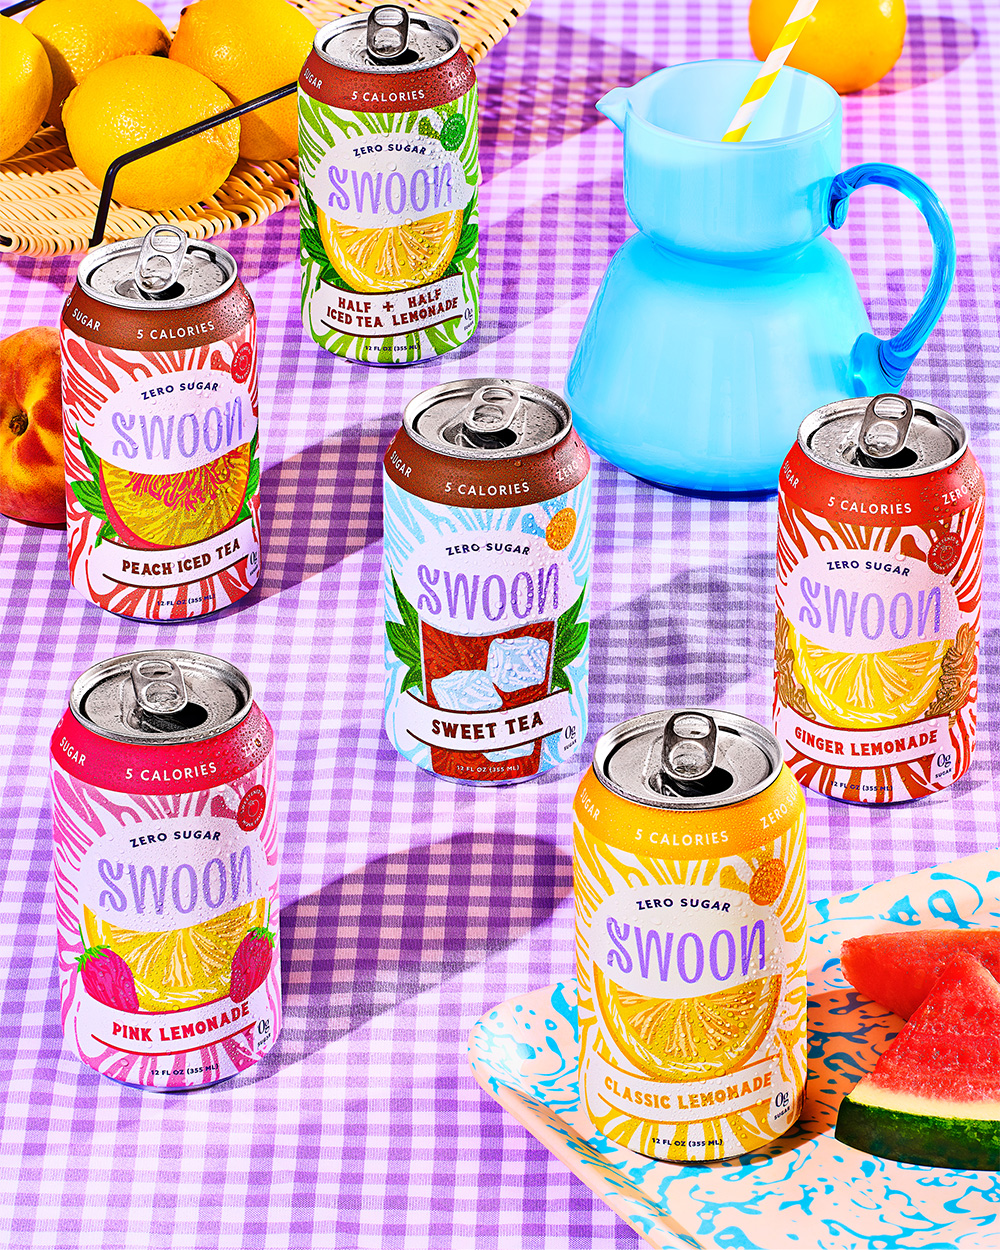 Swoon cans with pitcher on picnic blanket